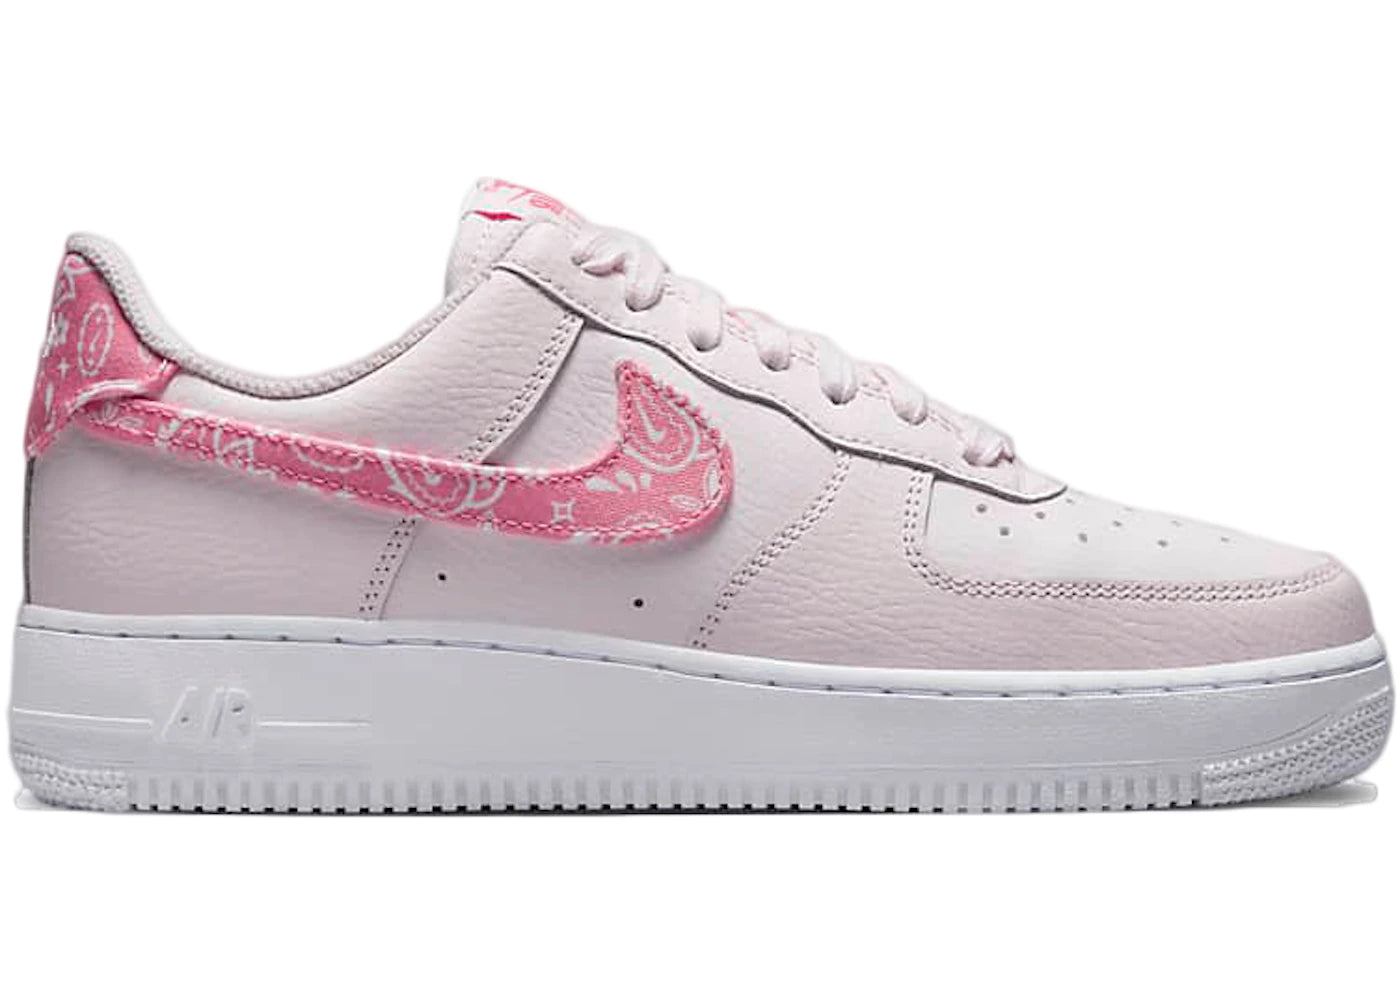 NIKE AIR FORCE 1 LOW '07 PAISLEY PACK PINK (W)